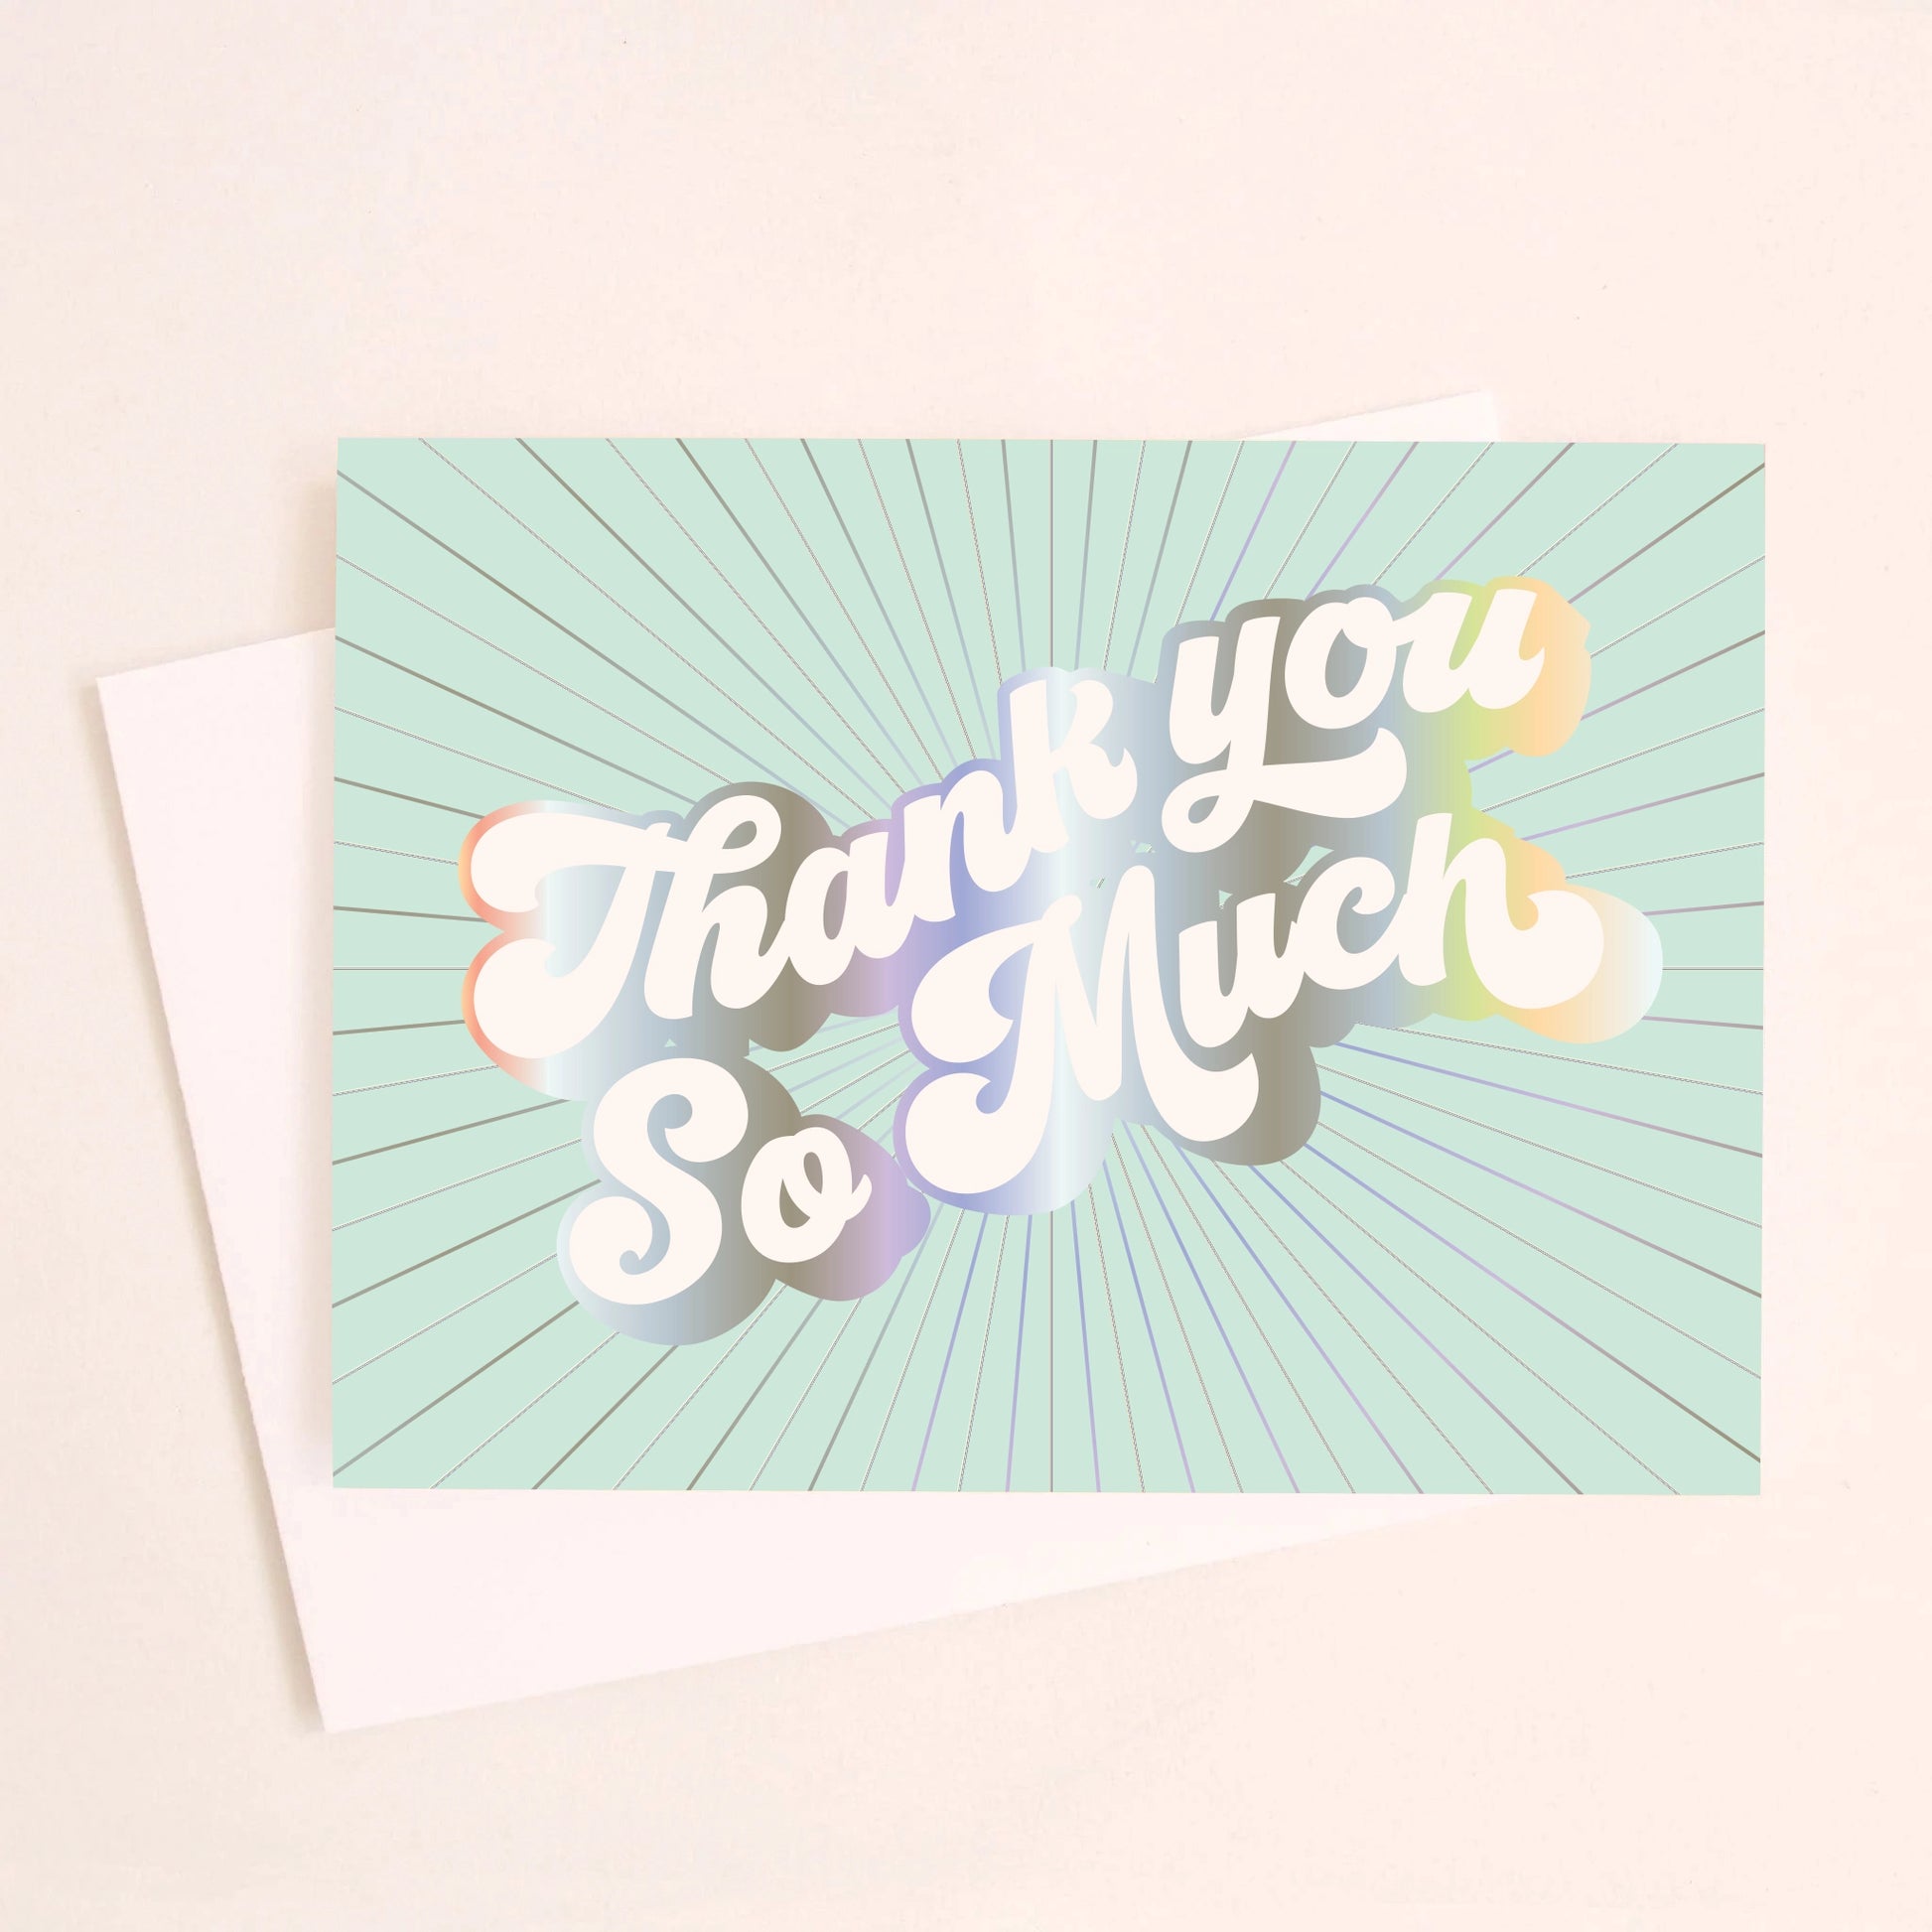 On an ivory background is a light teal greeting card with white, holographic outlined text that reads, "Thank You So Much". 